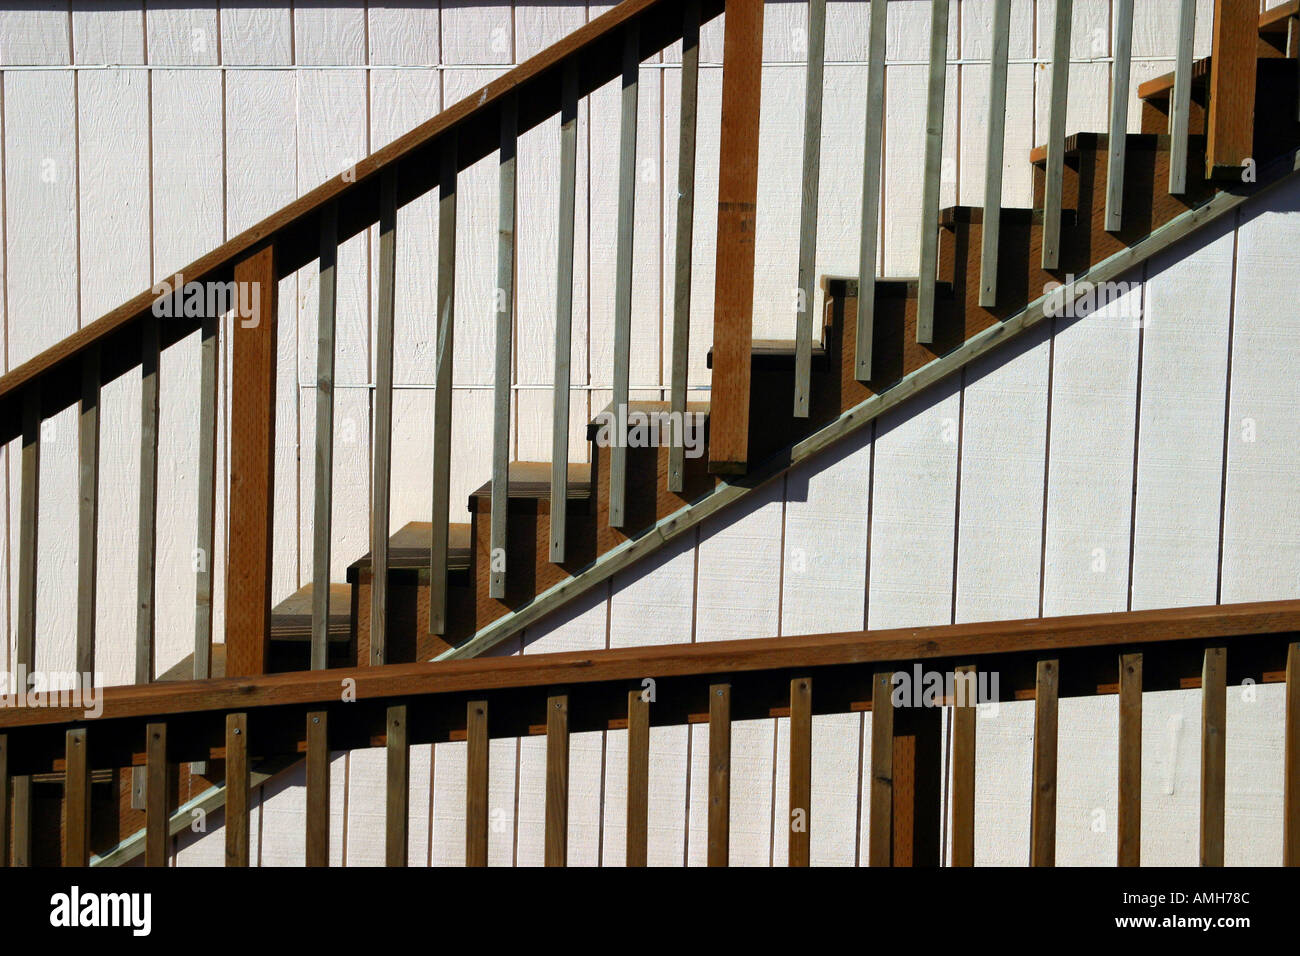 Wooden steps on the side of a building Stock Photo